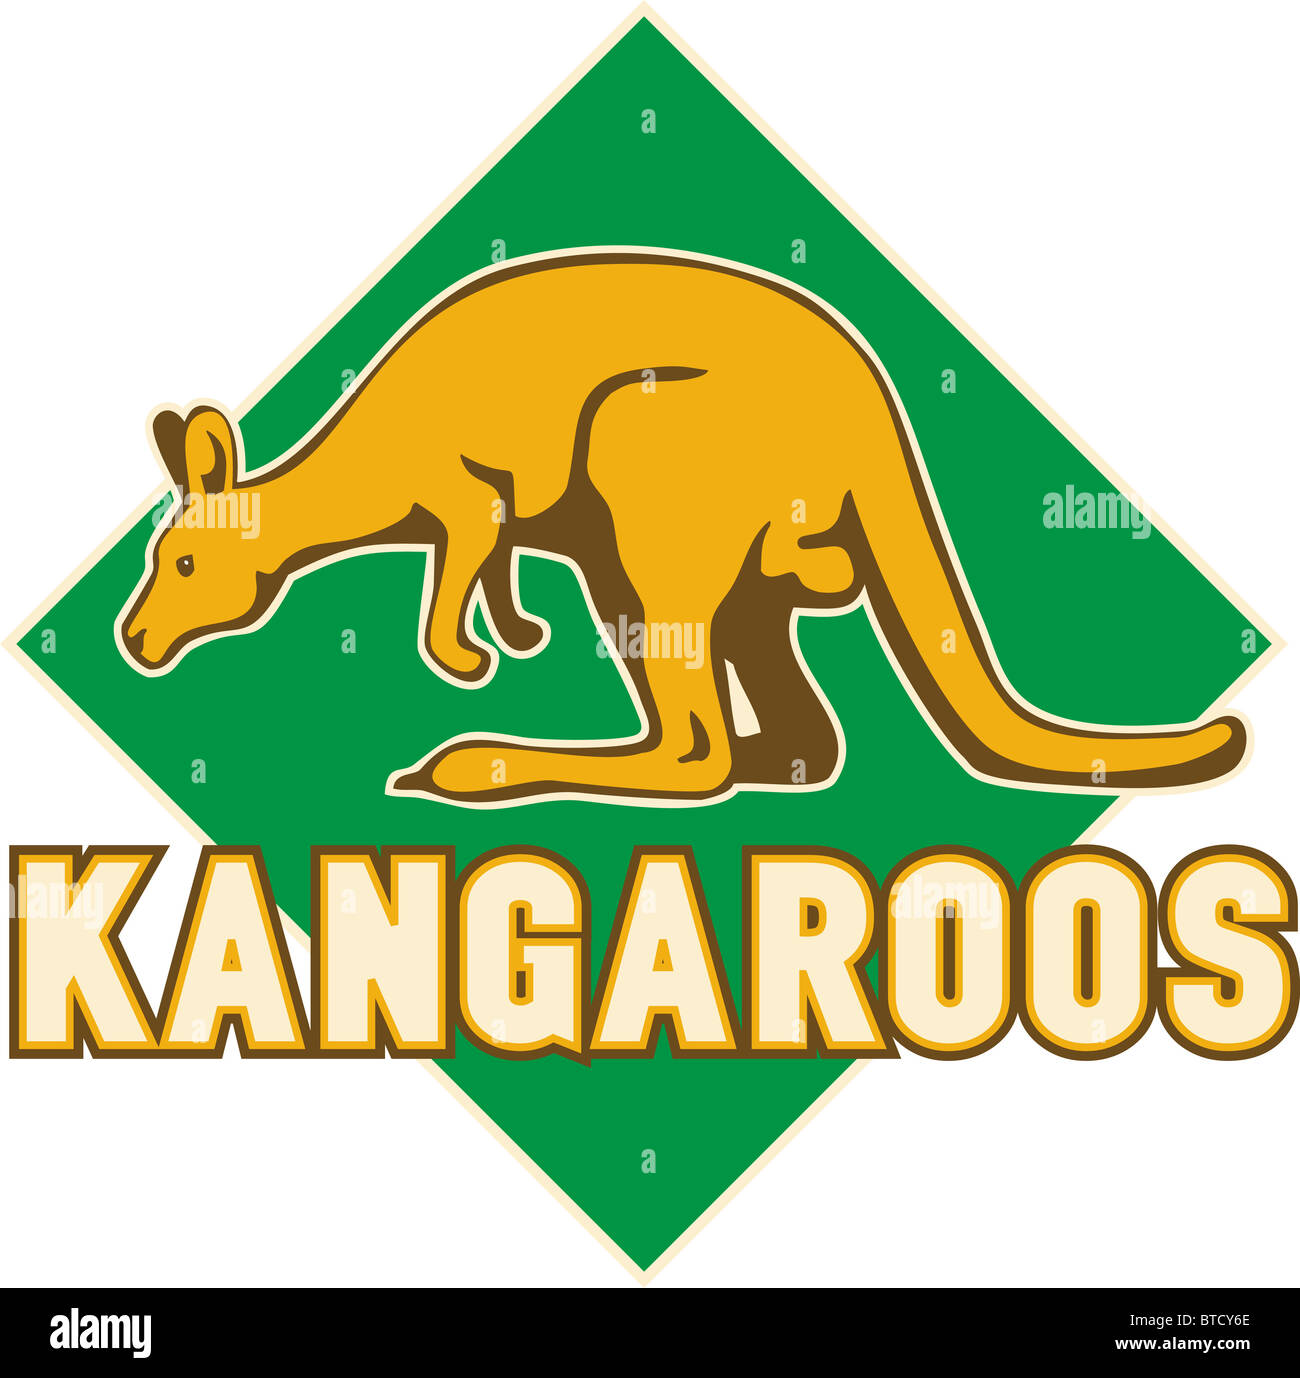 illustration of a kangaroo or wallaby mascot side view with shield in  background done in green and gold for sporting sports club Stock Photo -  Alamy